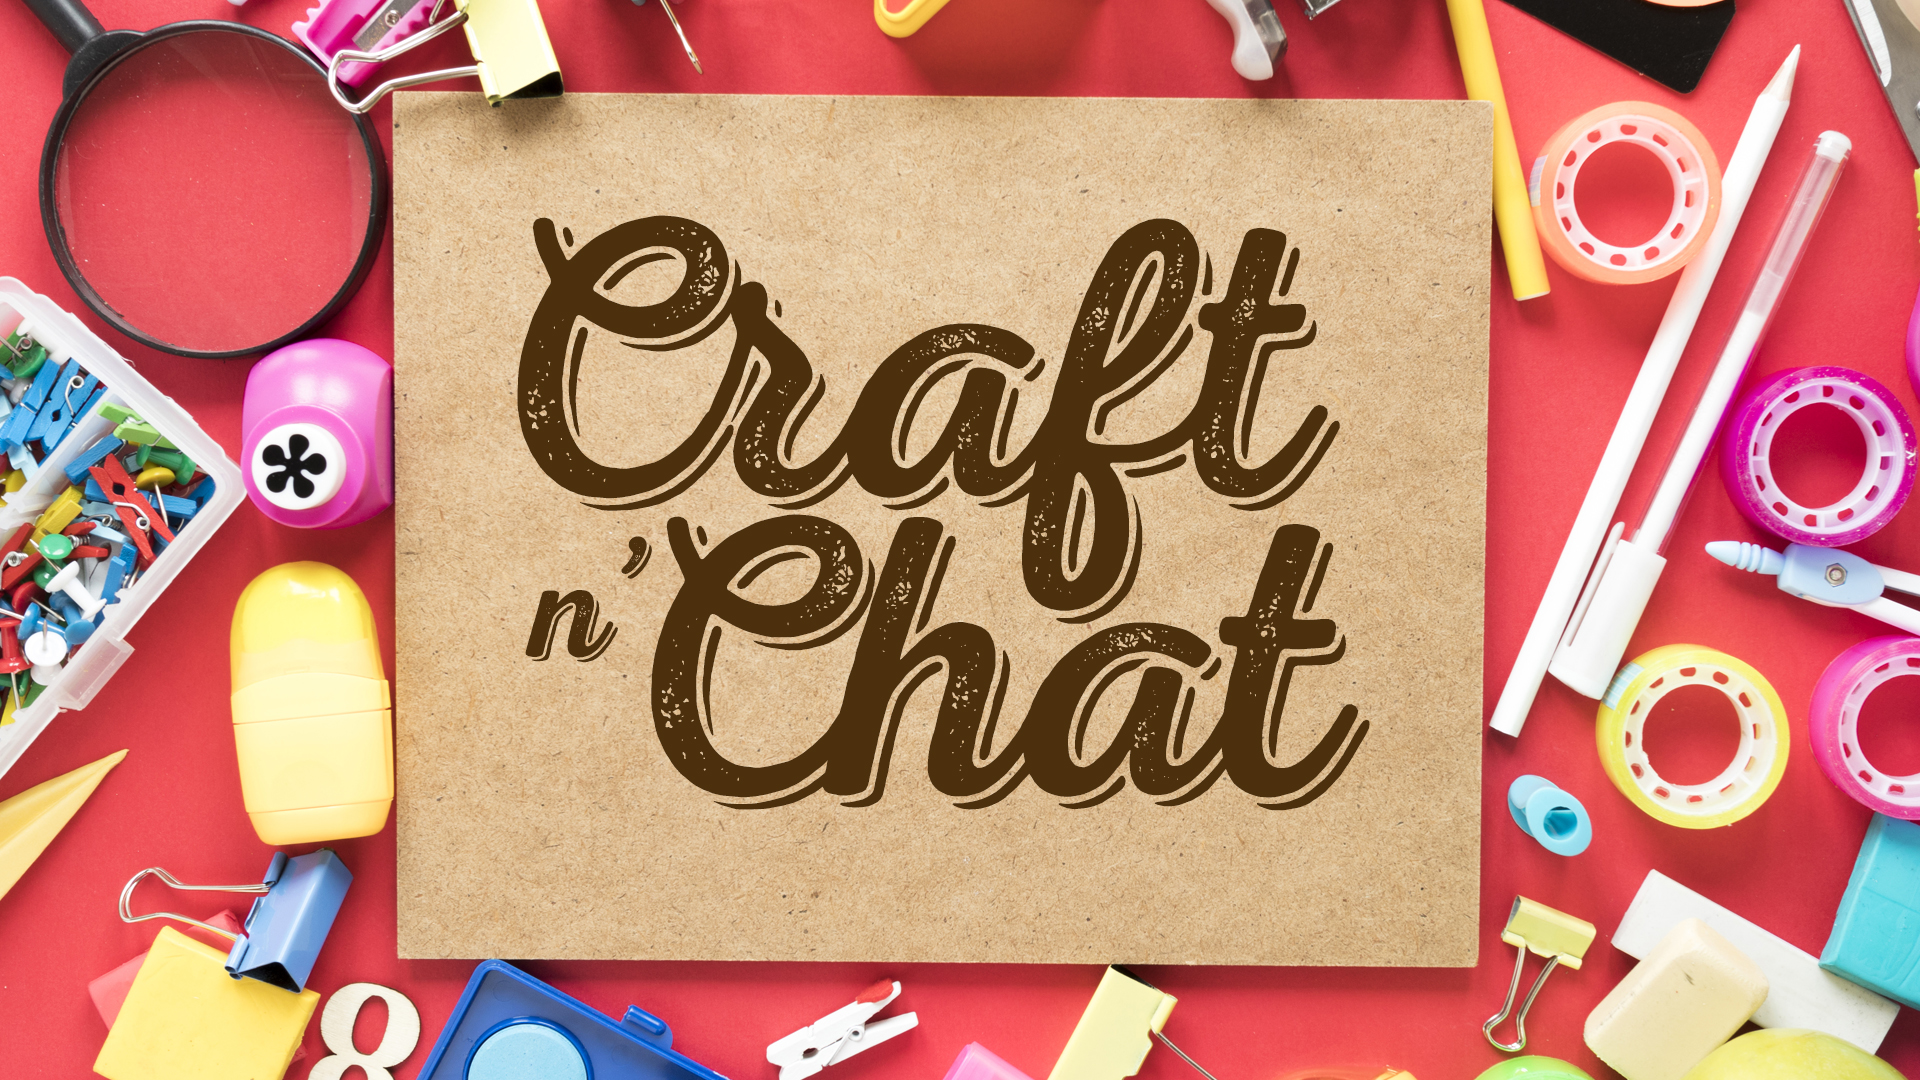 Craft n Chat Women's event on 3rd Saturday of the month